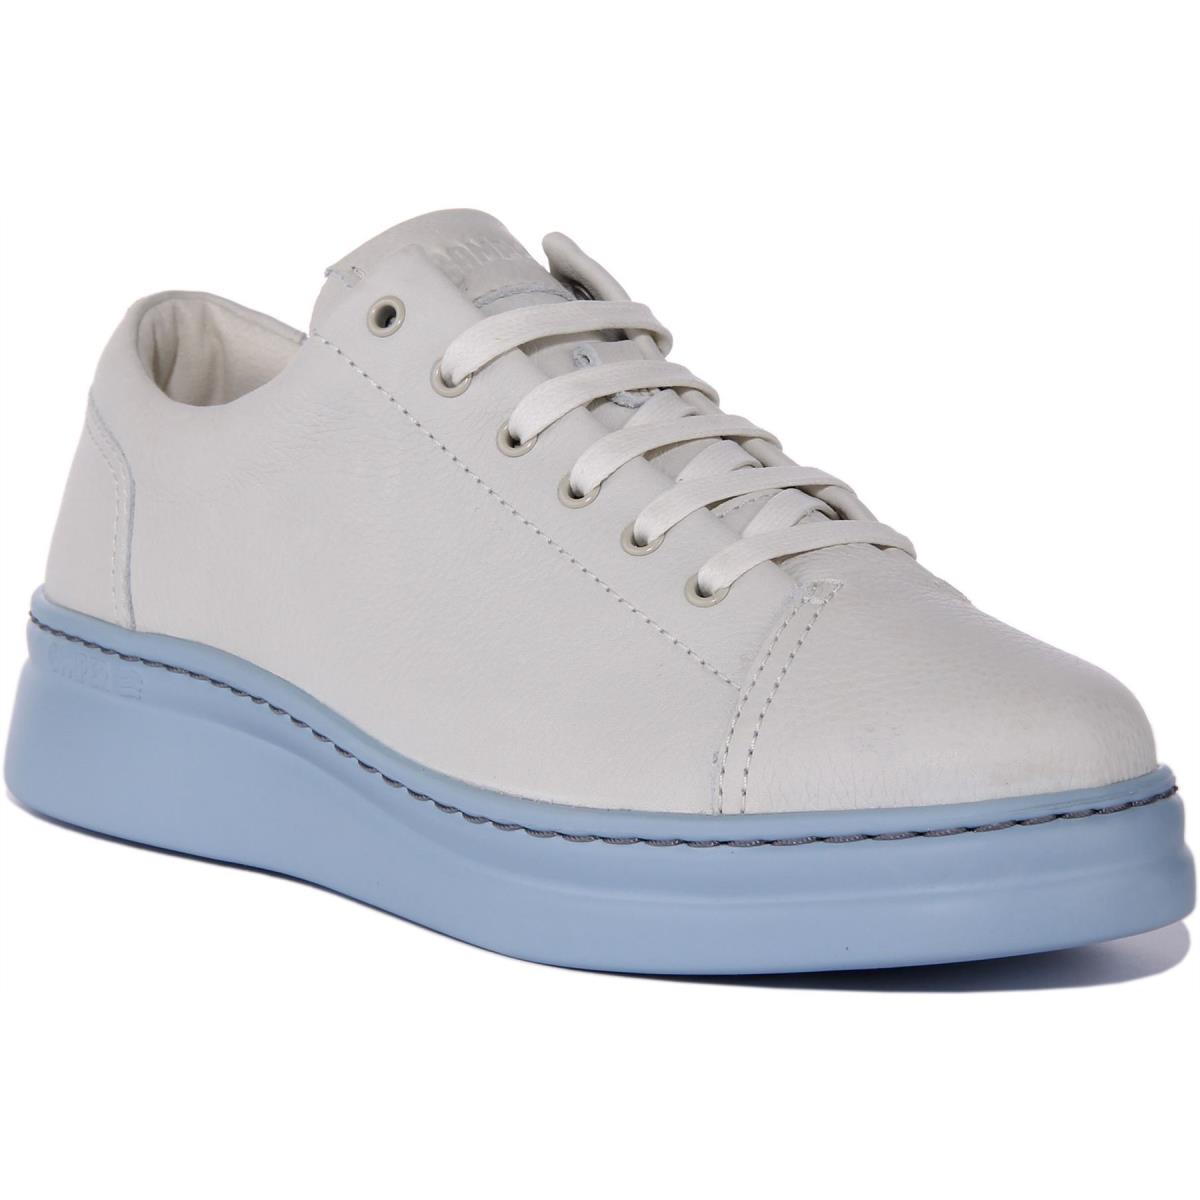 Camper Runner Up Womens Lace Up Leather Sneakers In White Blue Size US 5 - 11 WHITE BLUE